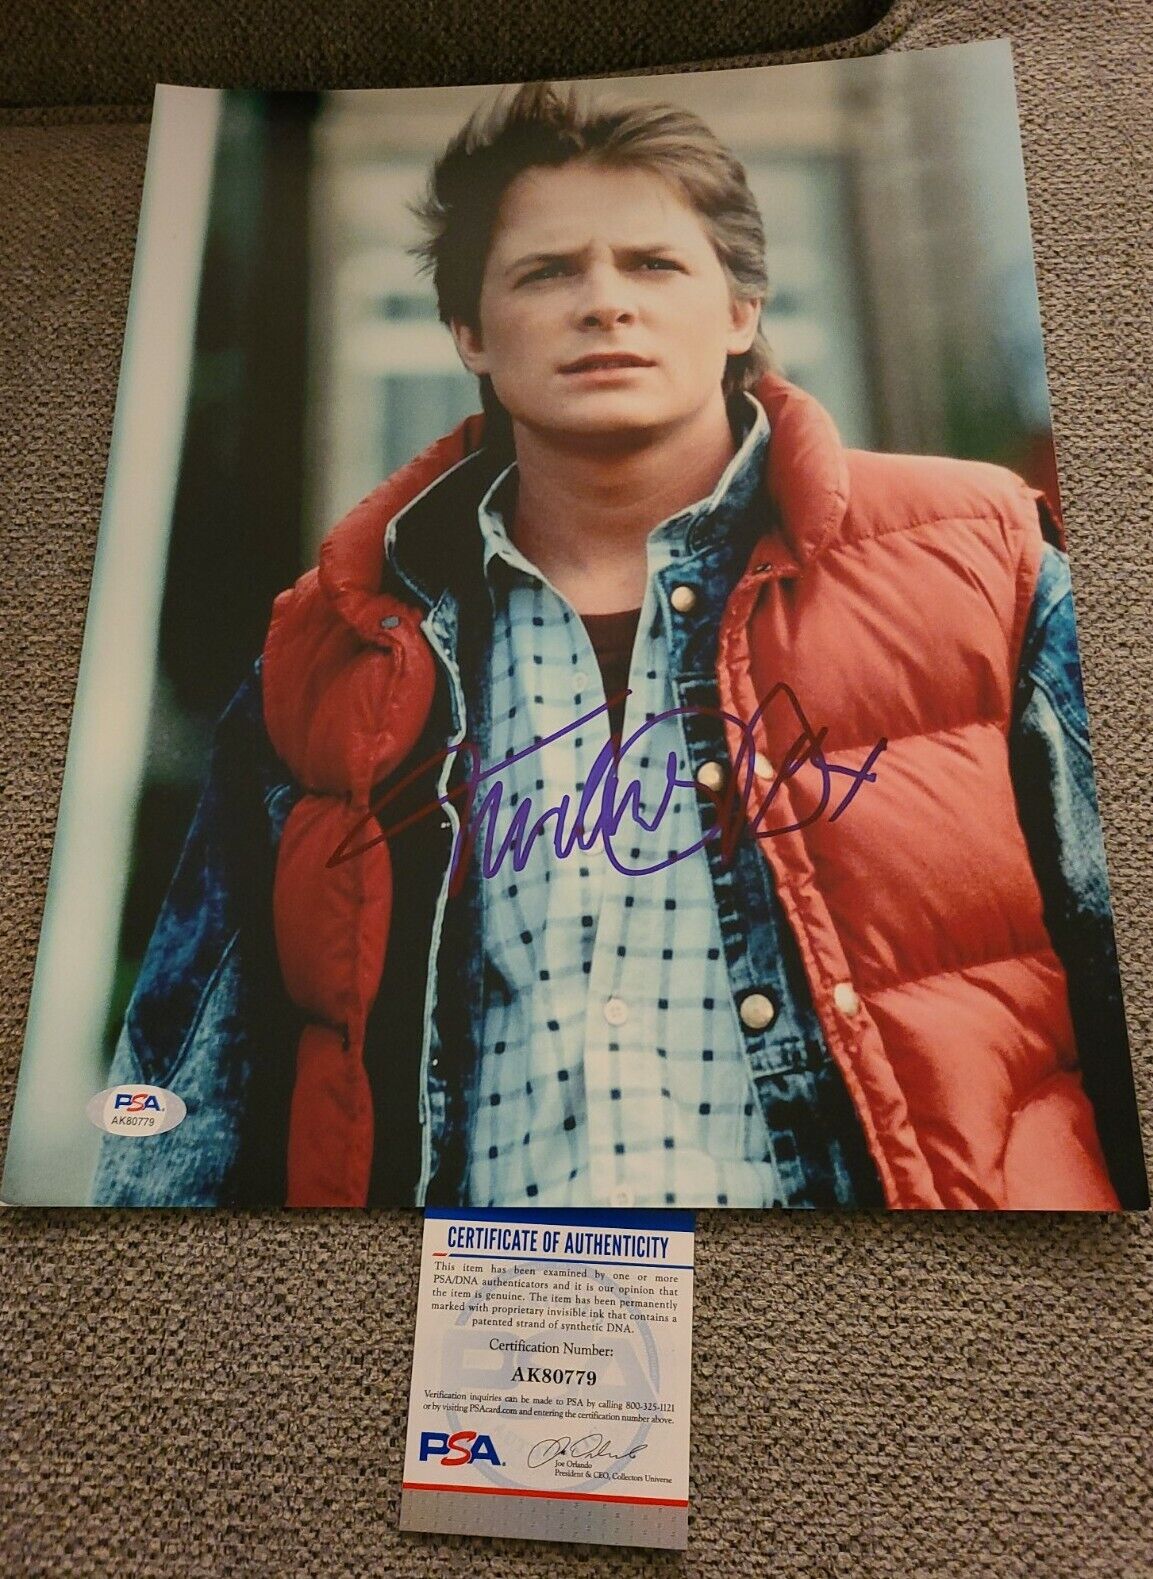 MICHAEL J FOX SIGNED 11X14 PHOTO BACK TO THE FUTURE MARTY MCFLY PSA DNA AK80779